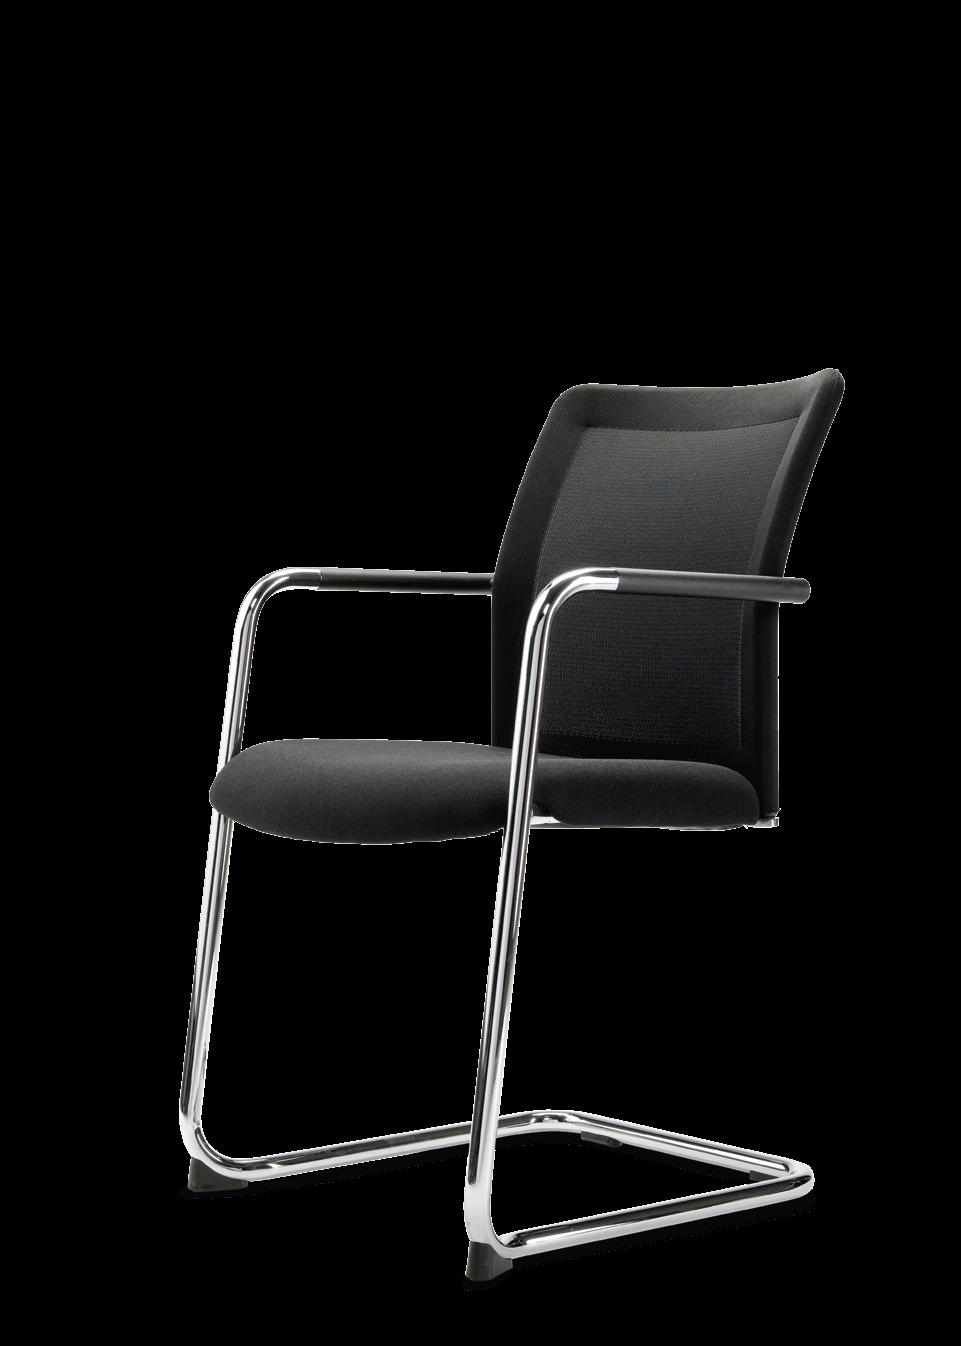 Suites in perfectly as a visitor chair; ideal for conference and meeting room seating.